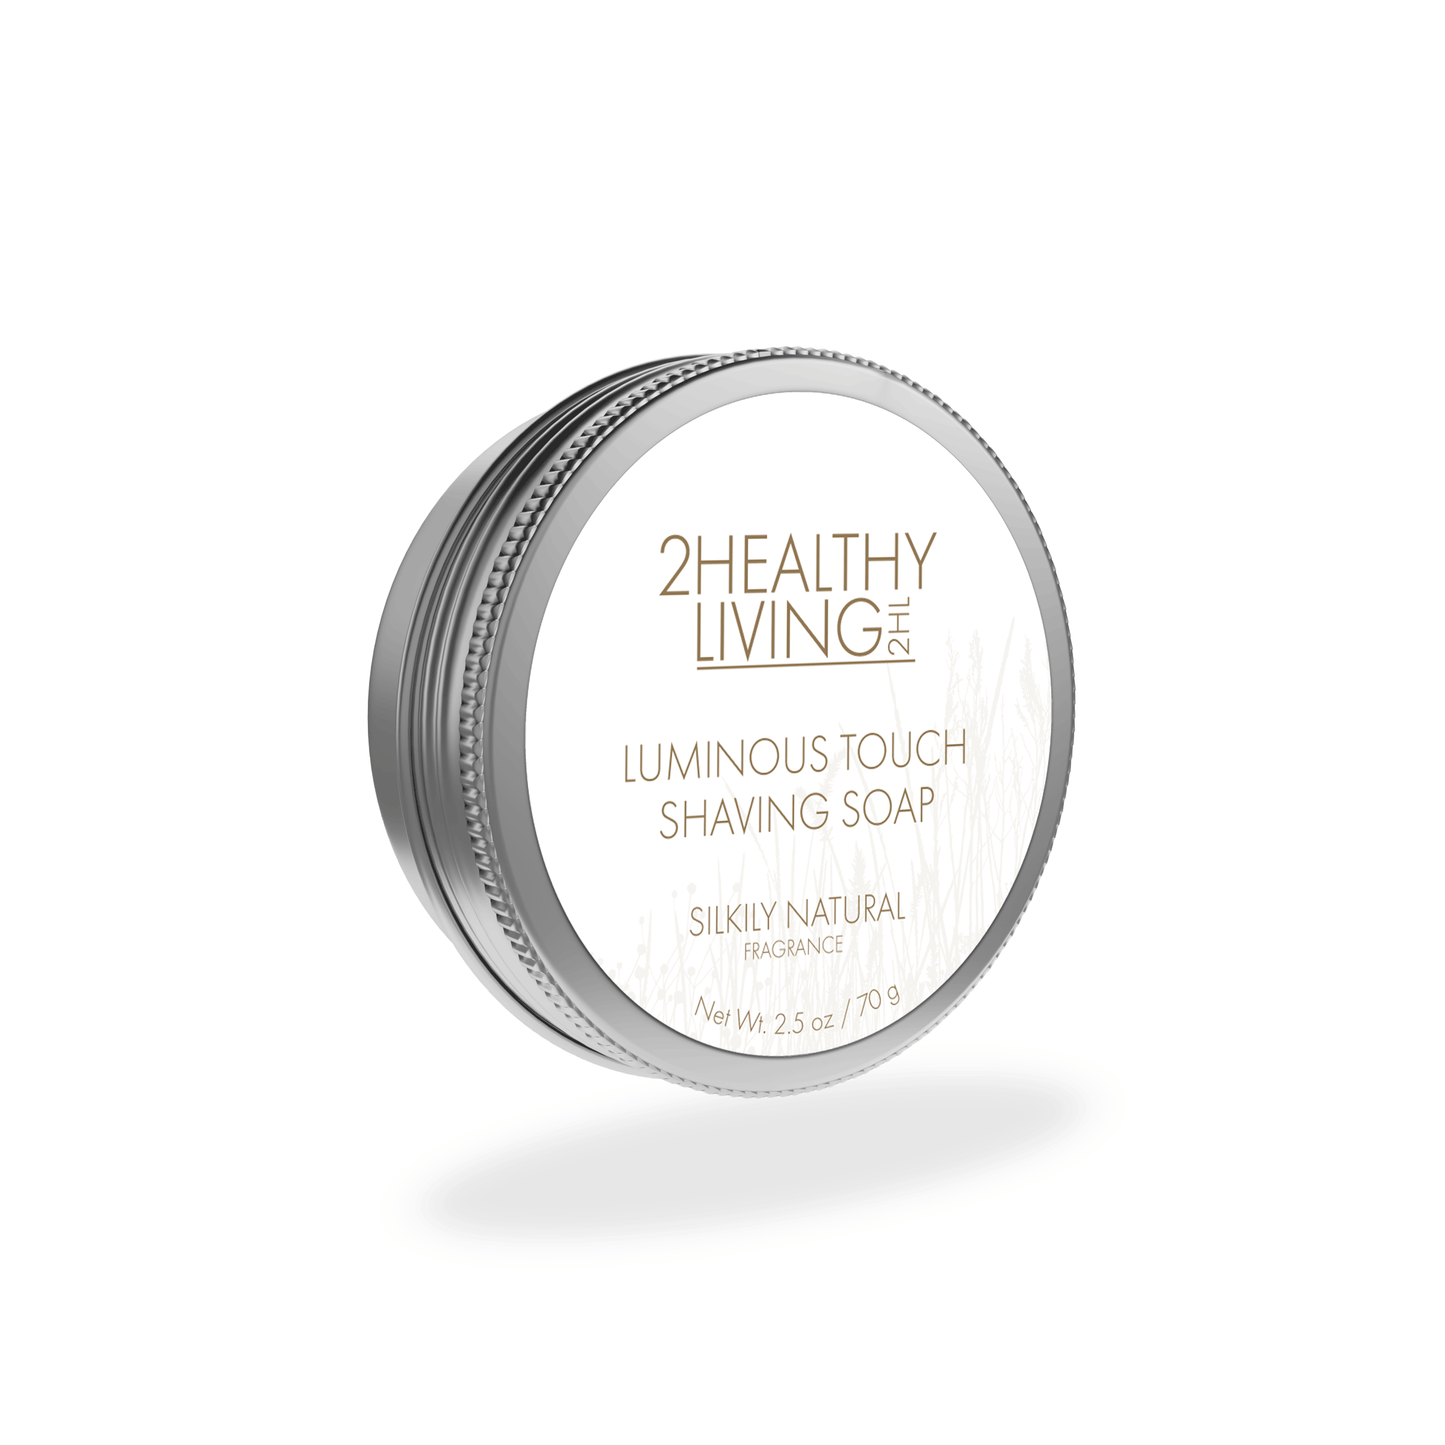 Silkily Natural Luminous Touch Shaving Soap